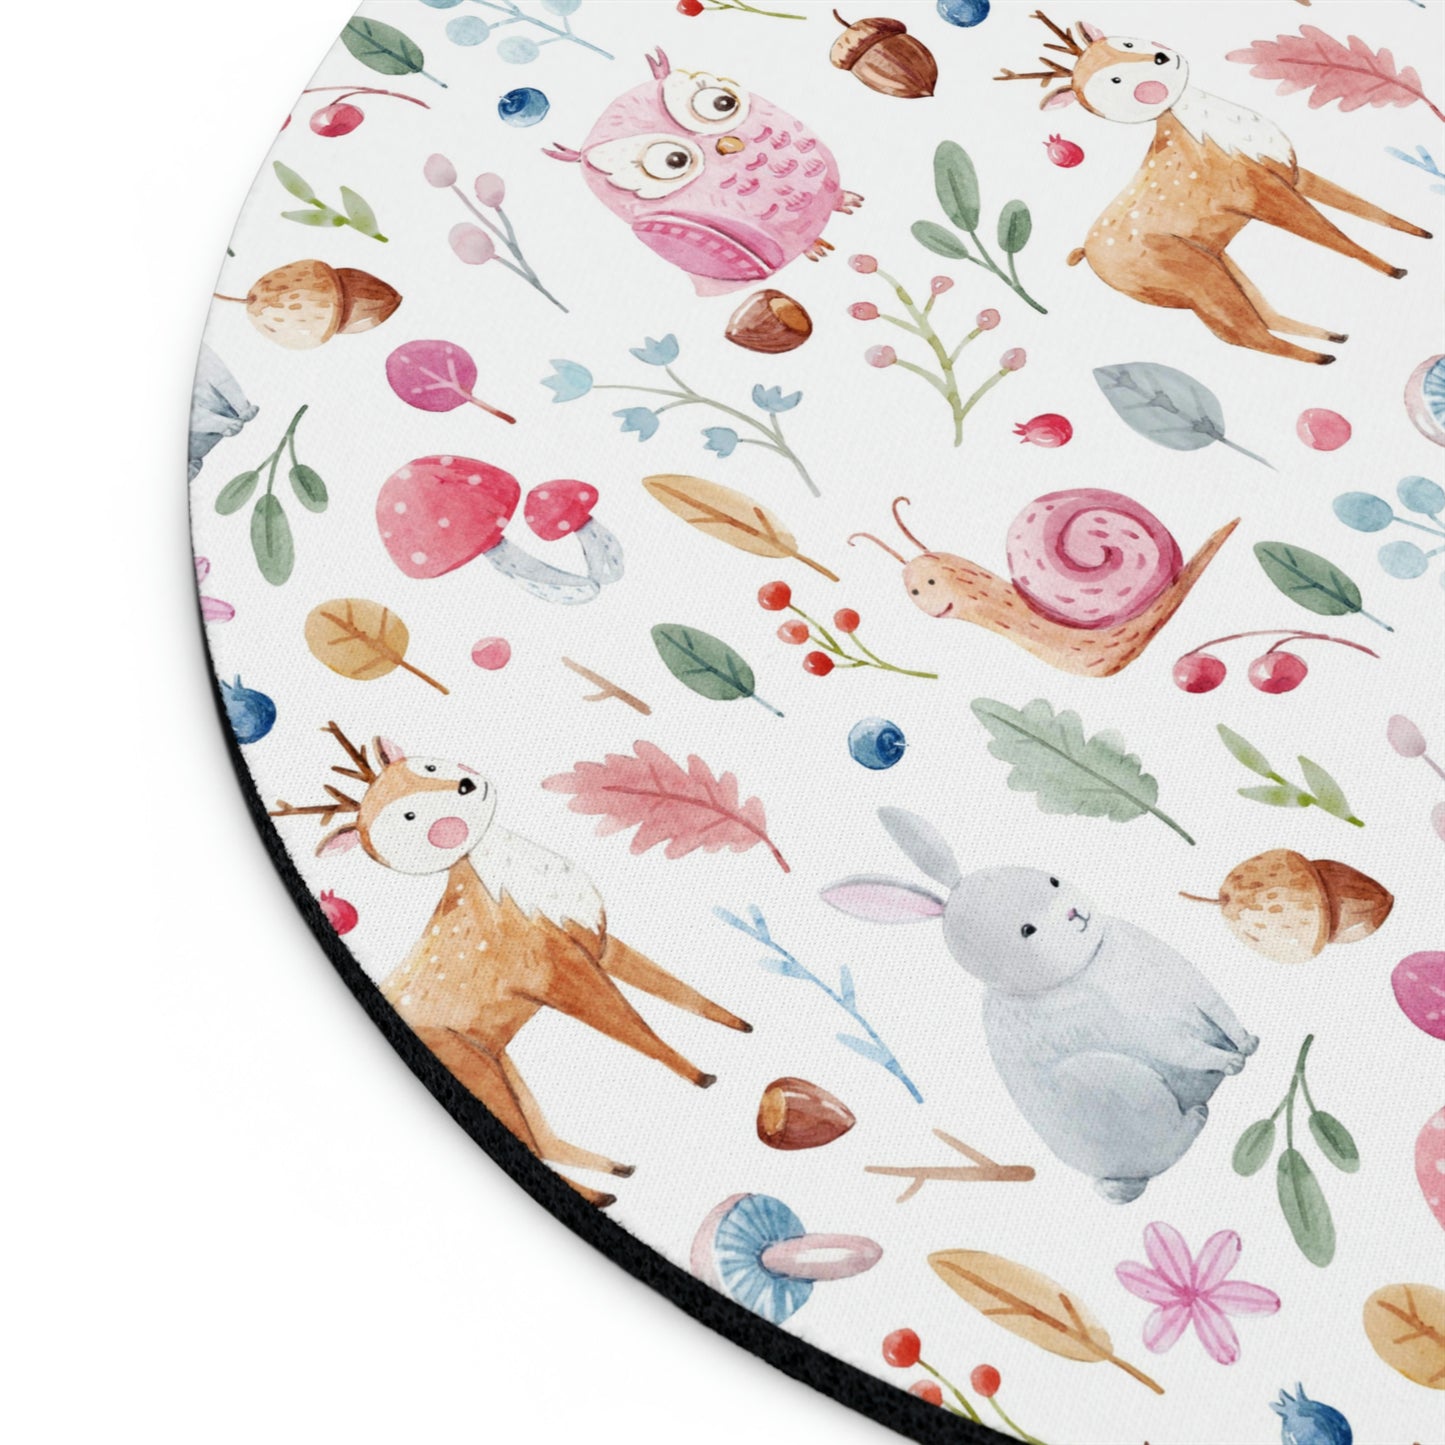 Fairy Forest Animals Mouse Pad